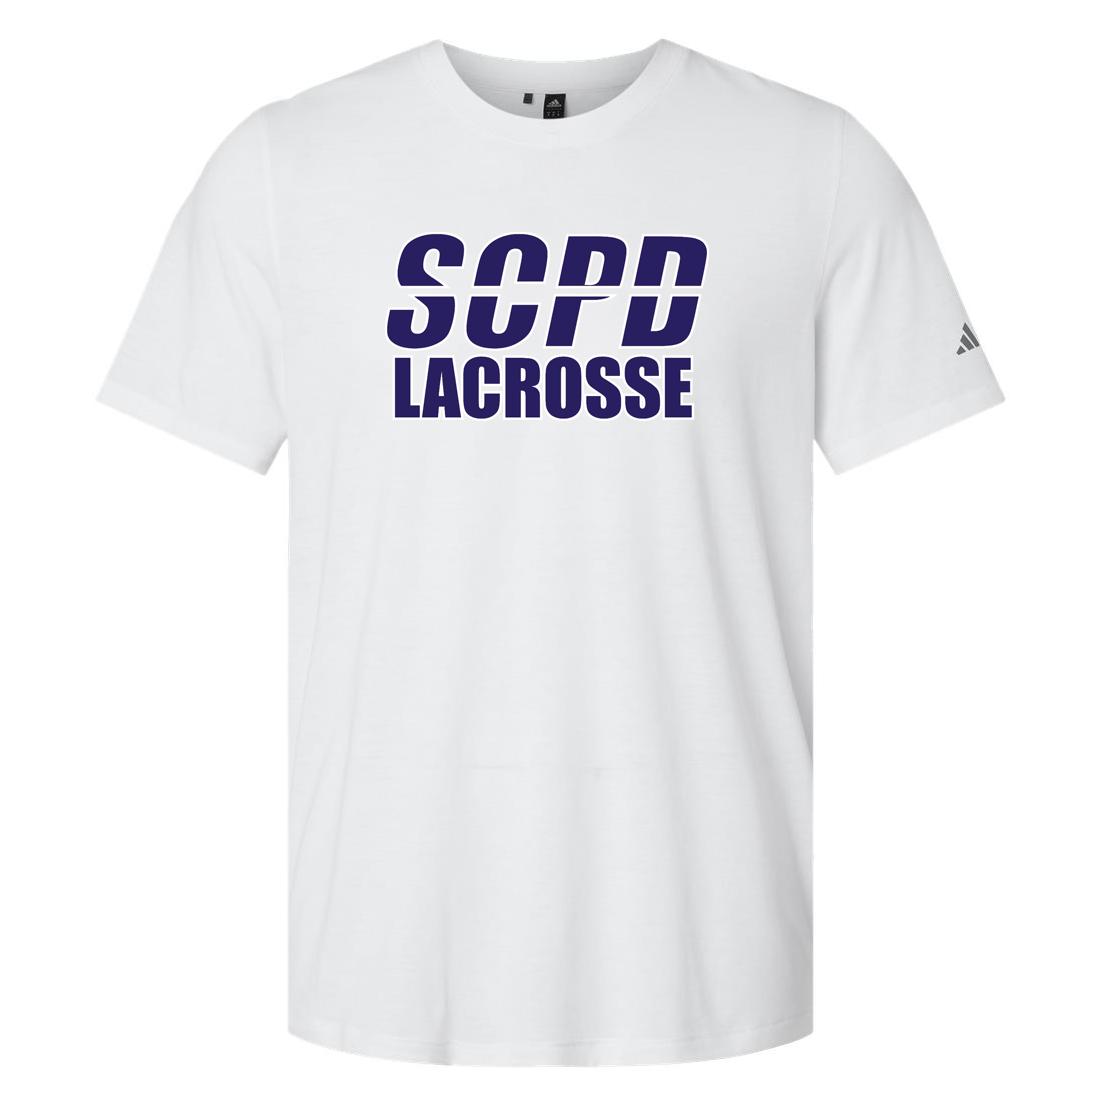 SCPD Lacrosse Adidas Blended T-Shirt